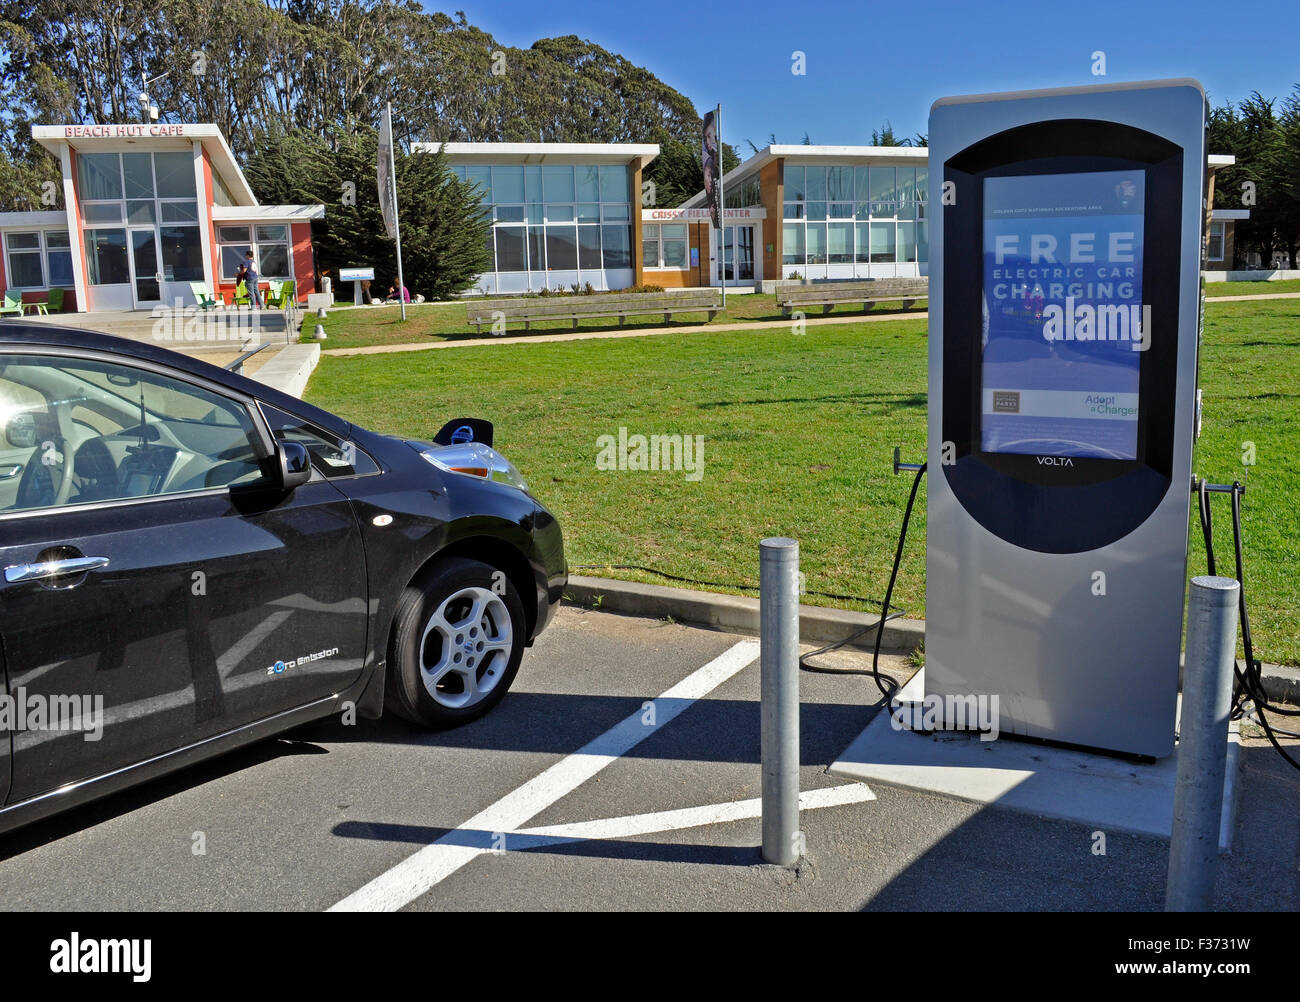 free electric car charging station, Crissy Field, San Francisco Stock